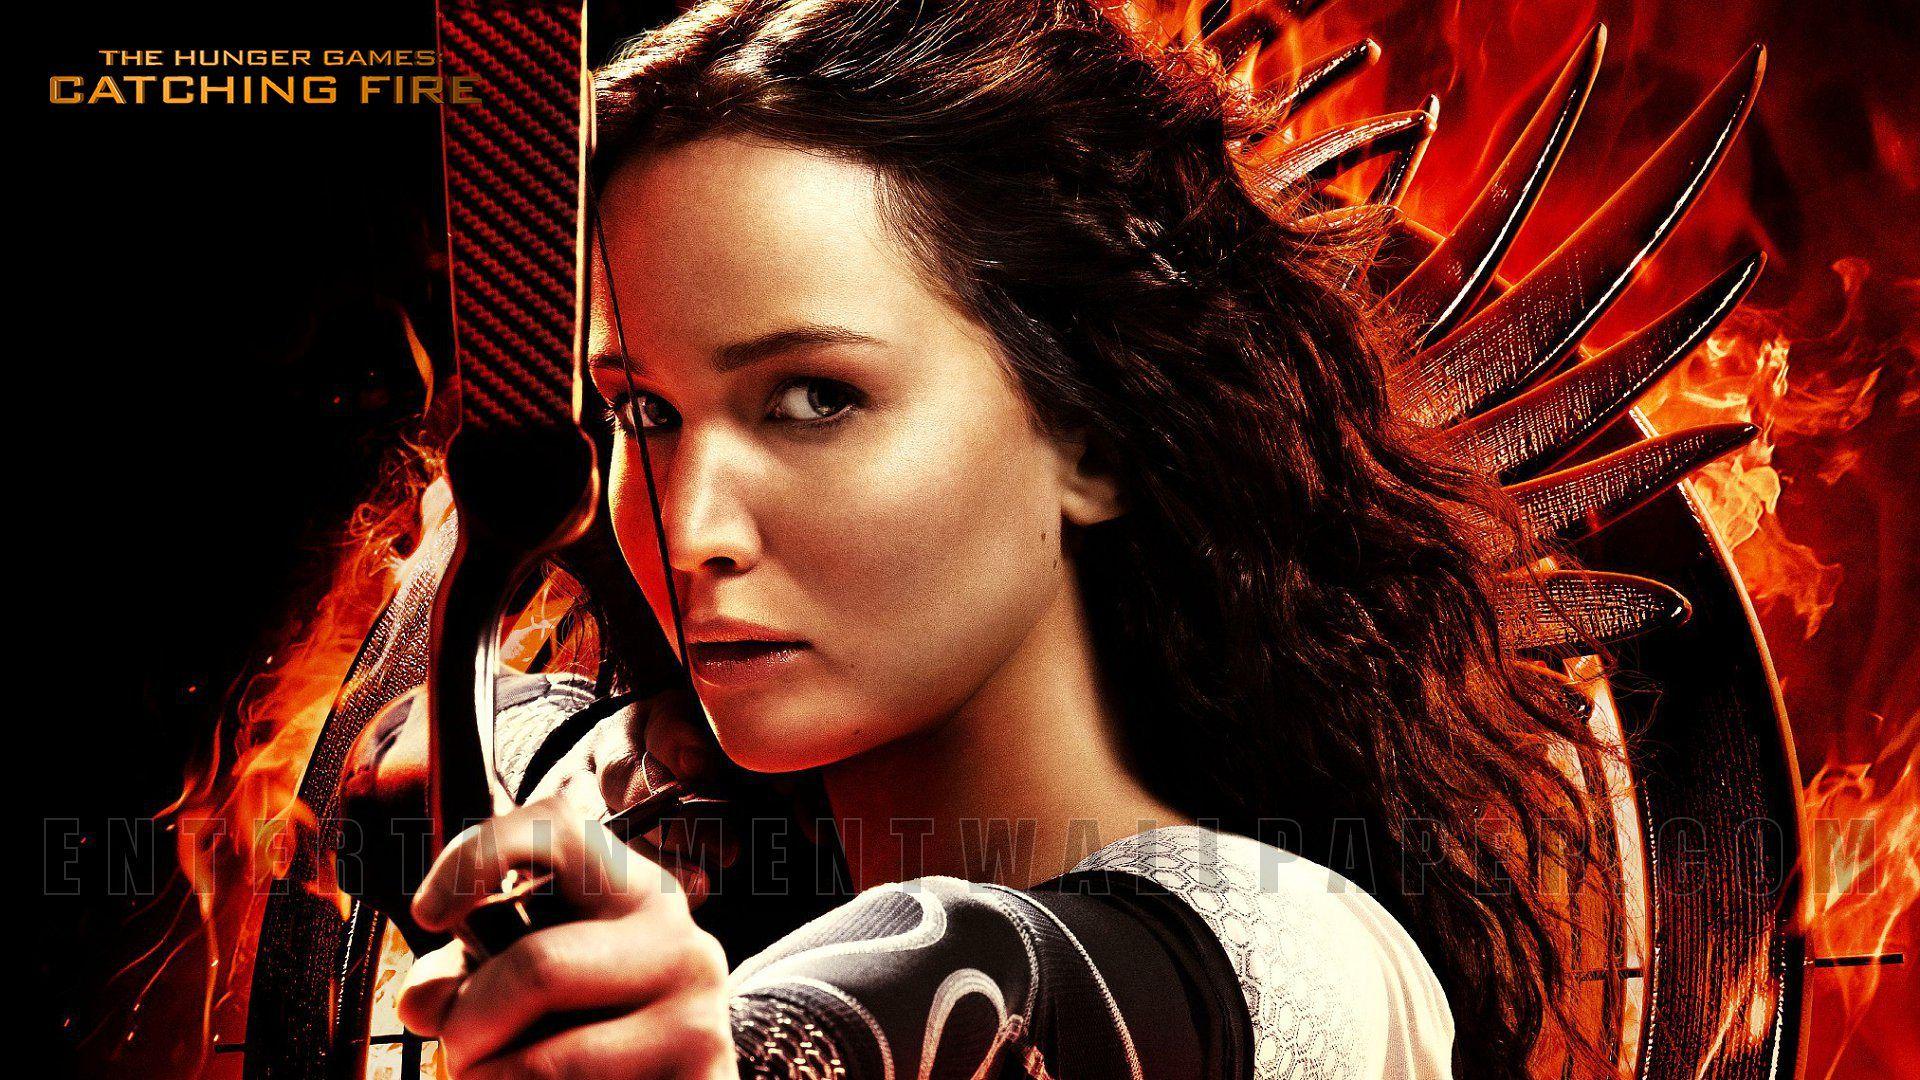 The Hunger Games: Catching Fire Wallpaper - 1920x1080